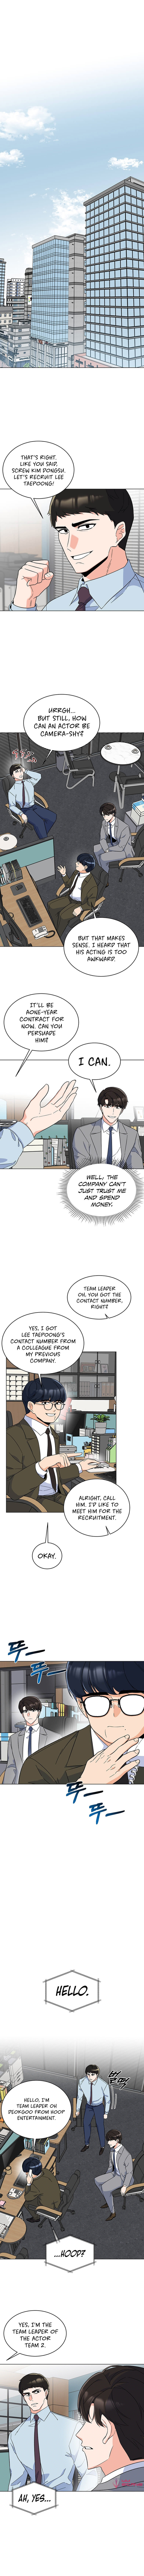 1st year Max Level Manager - Chapter 54 Page 4